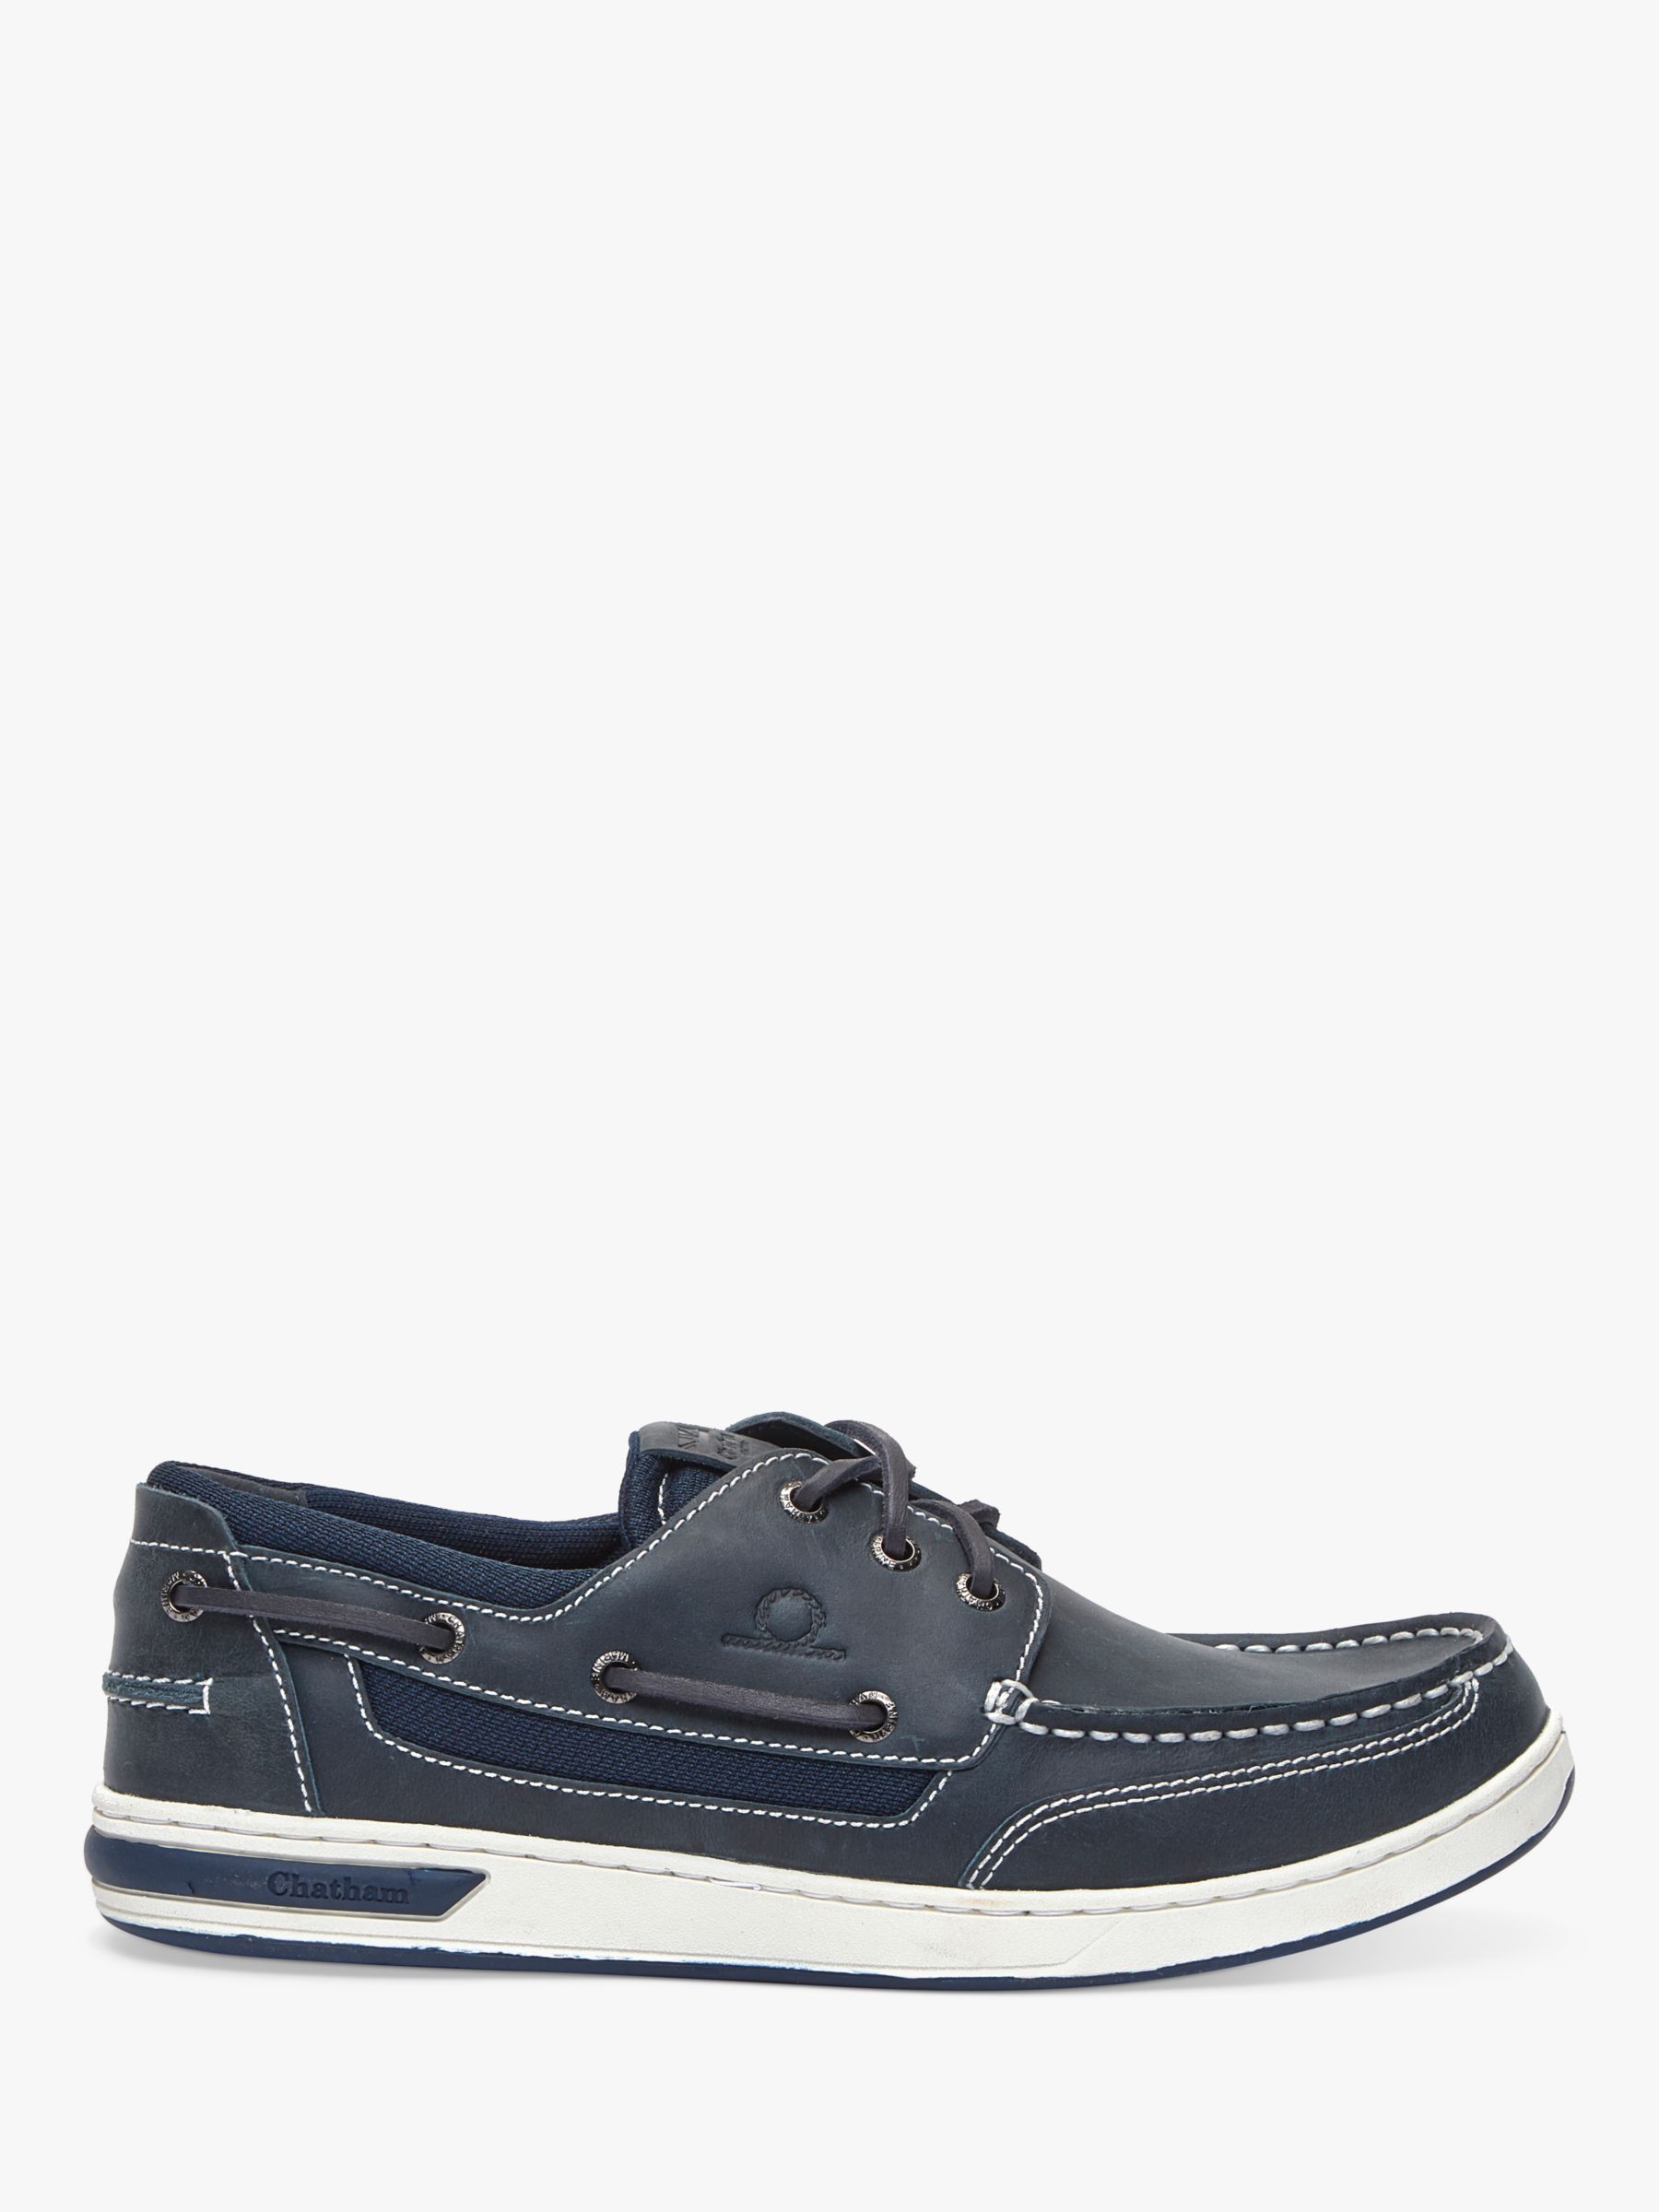 Chatham Buton G2 Premium Leather Deck Shoes, Navy, 9S